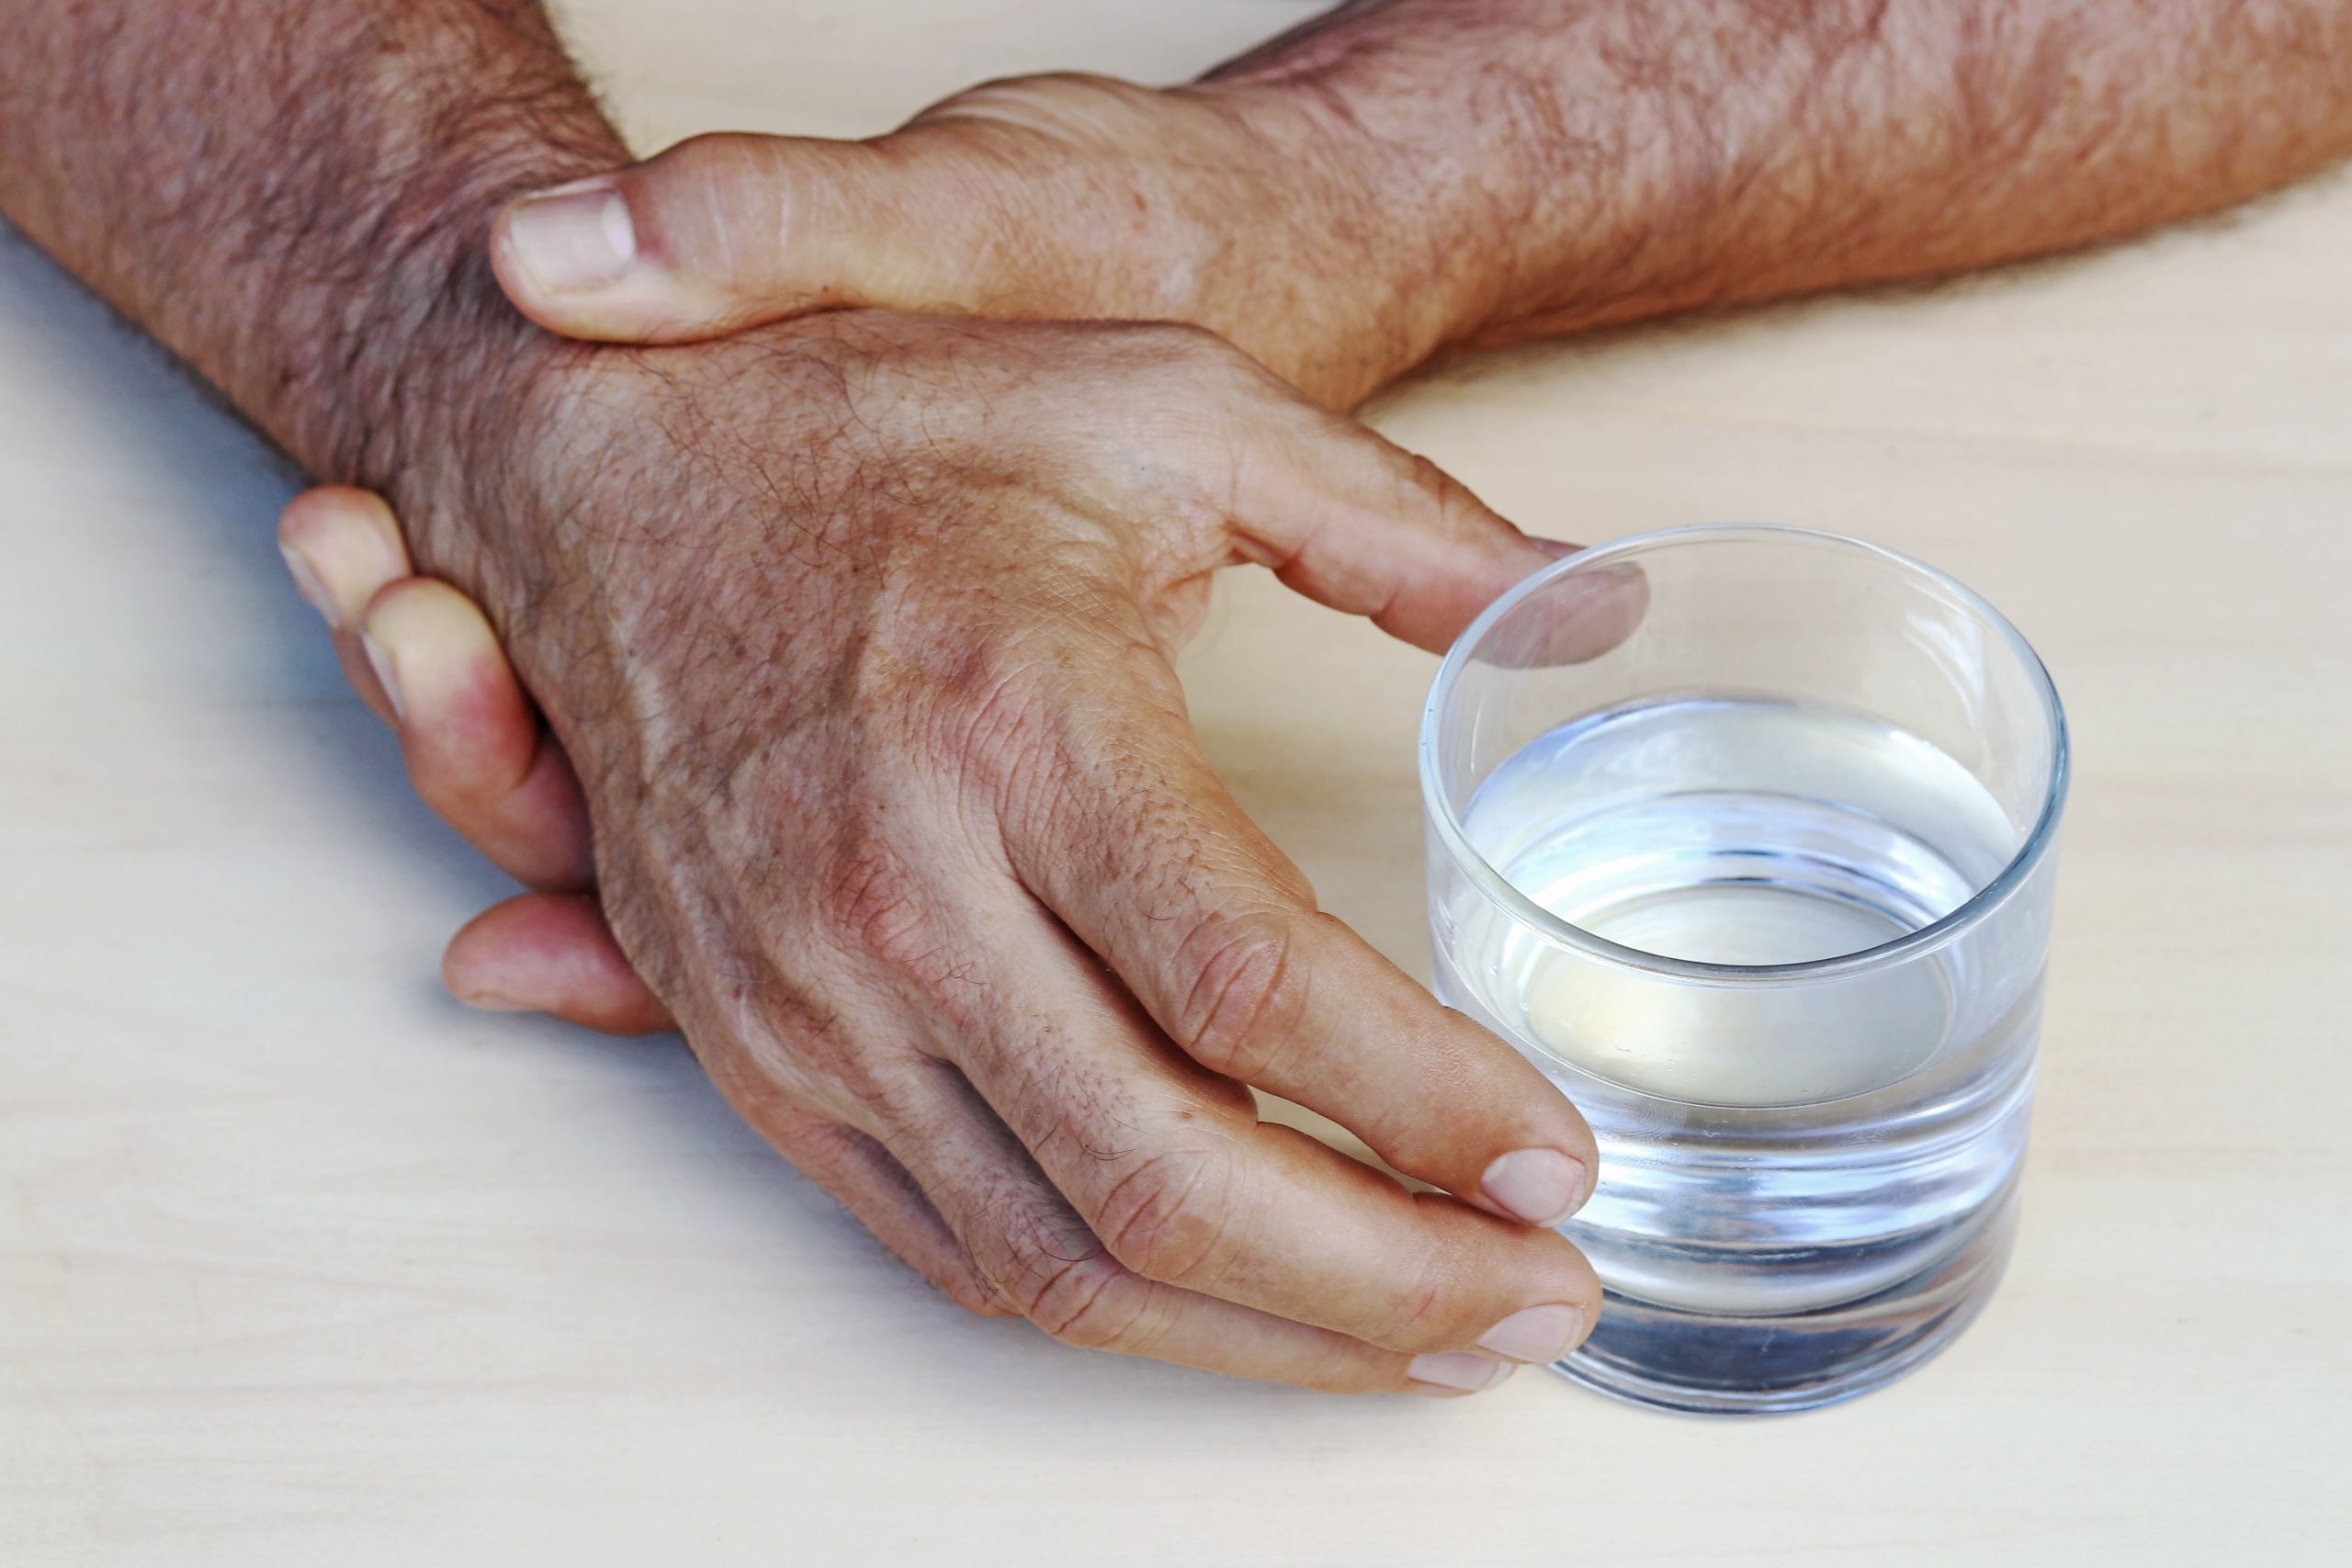 trembling hands of a Parkinson's patient finding it difficult to hold a glass of water.